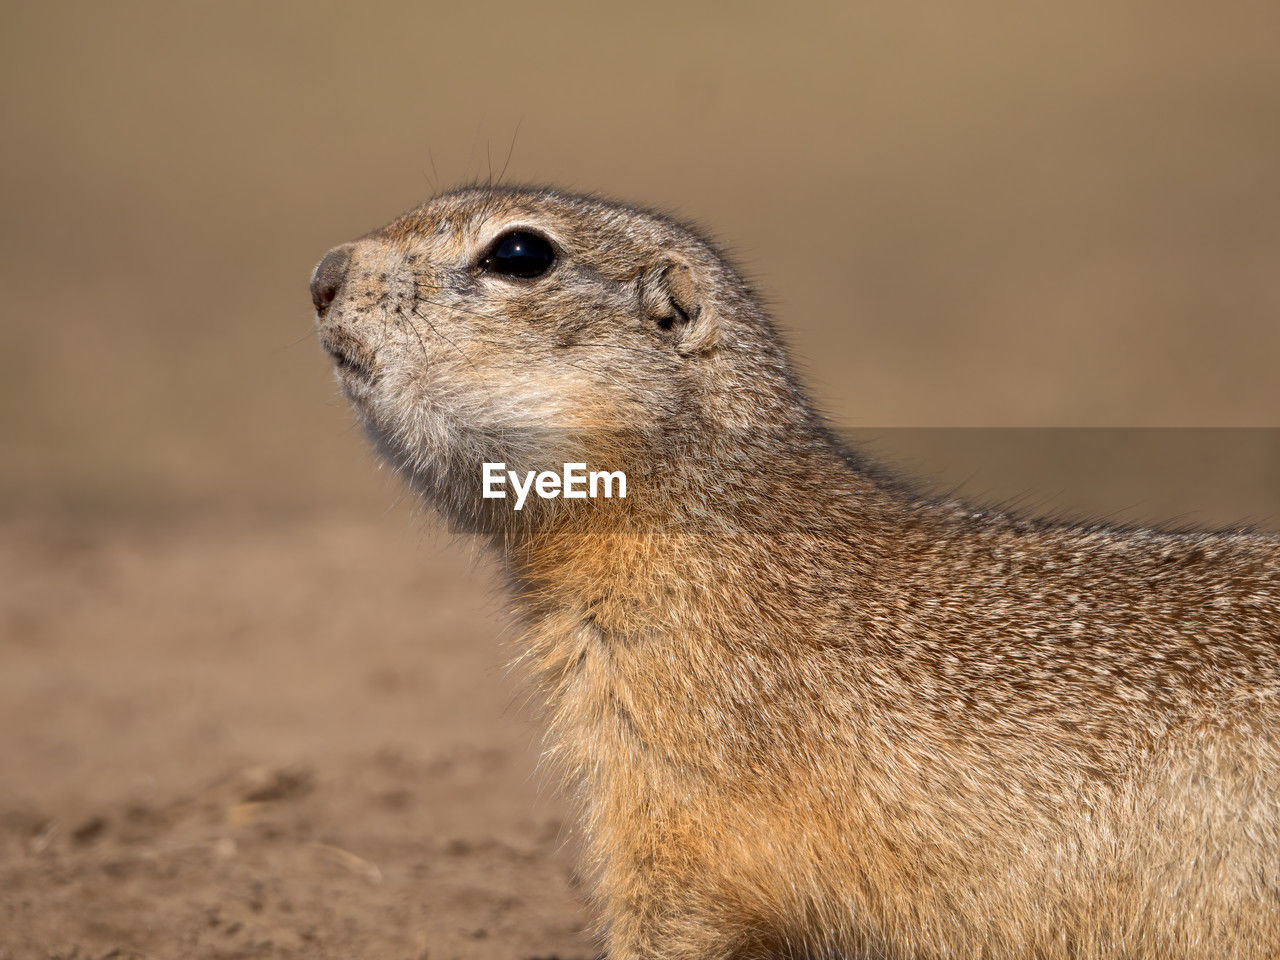 animal, animal themes, animal wildlife, one animal, wildlife, prairie dog, whiskers, mammal, no people, nature, side view, meerkat, portrait, close-up, squirrel, focus on foreground, outdoors, rodent, looking, standing, alertness, day, land